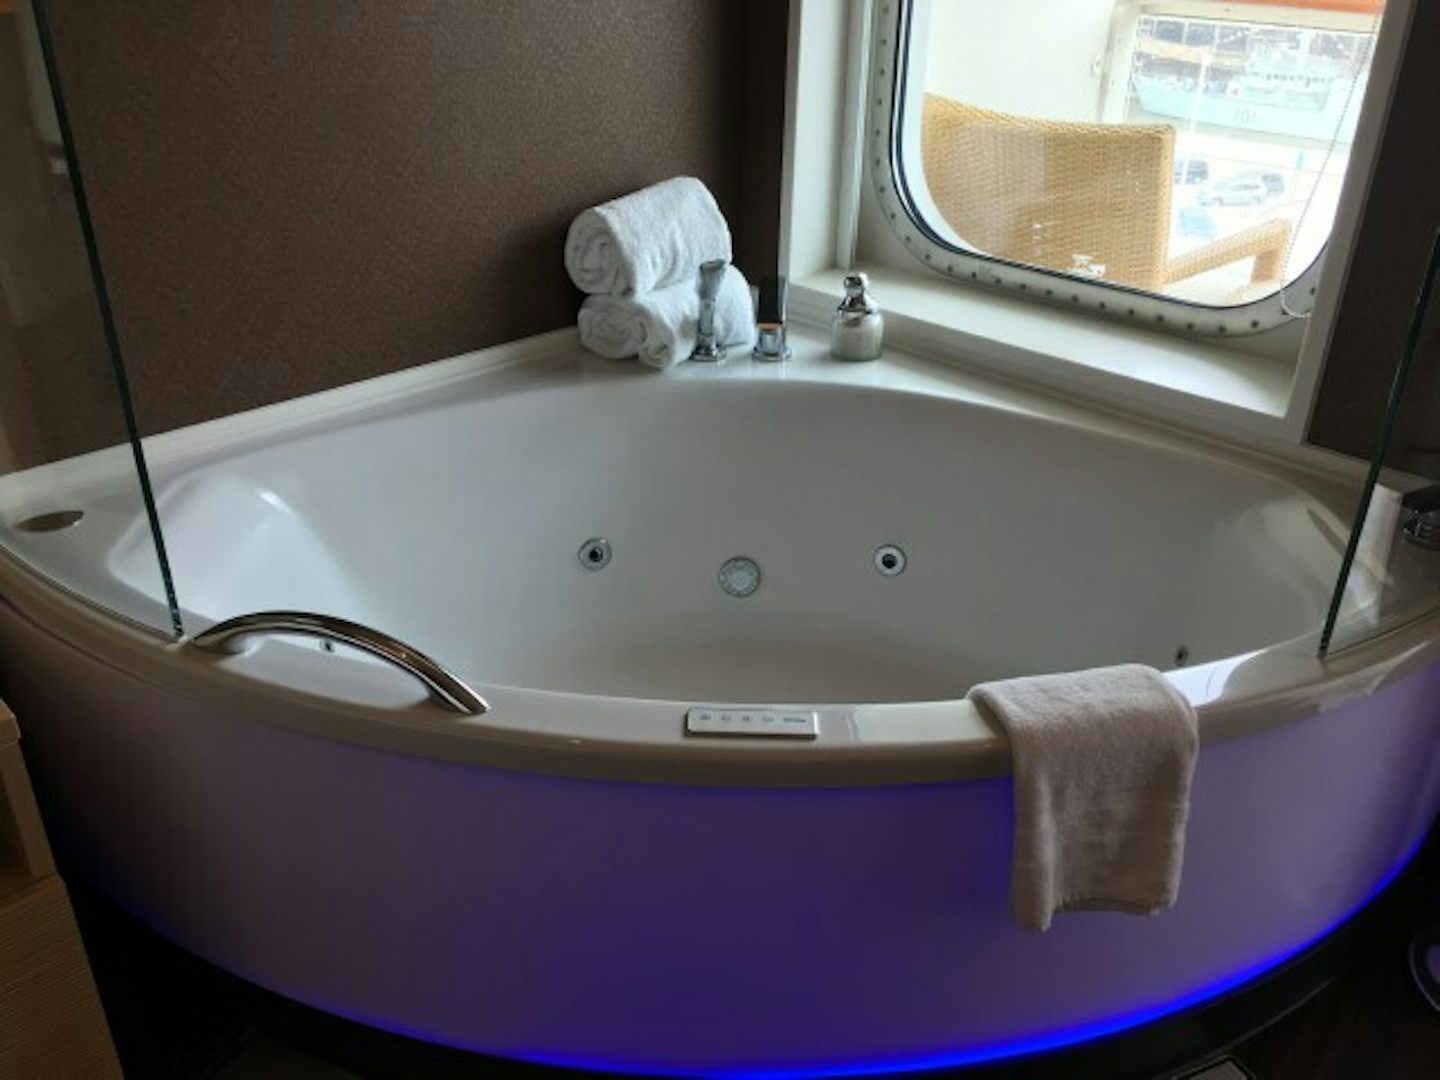 H9 The Haven Spa Suite with Balcony - A wonderful Jacuzzi tub with a view!